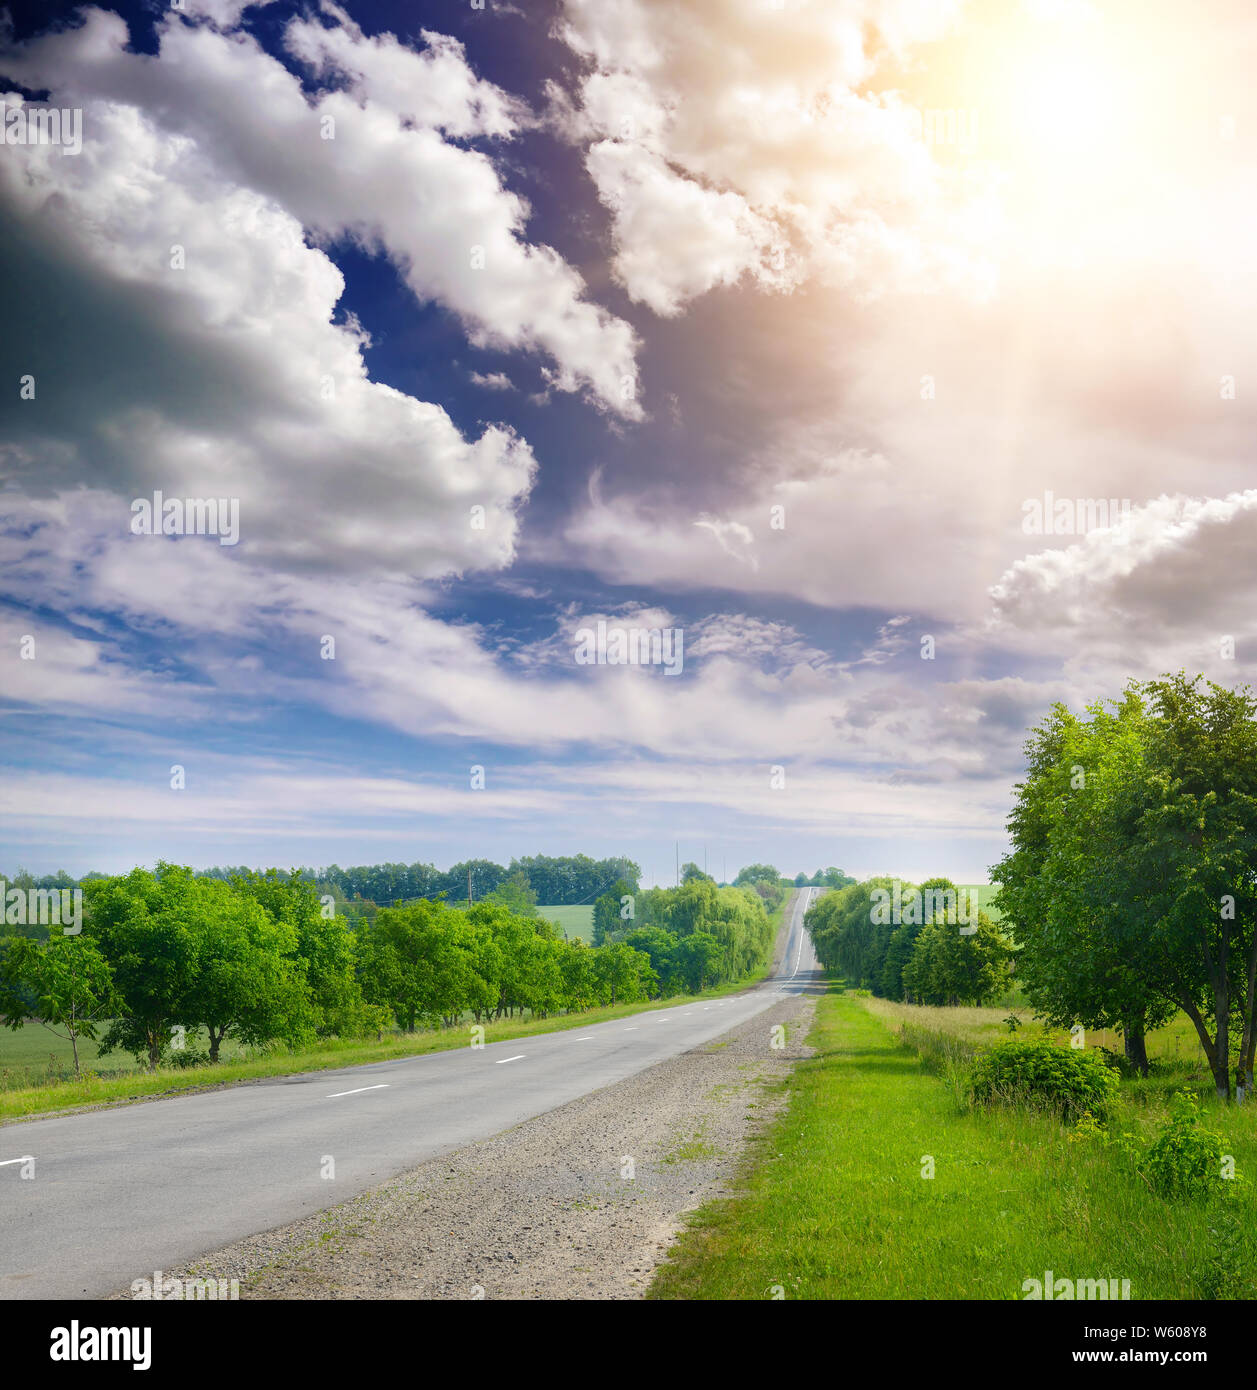 Asphalt road in countryside through green fields, bright blue sky with shining sun Stock Photo